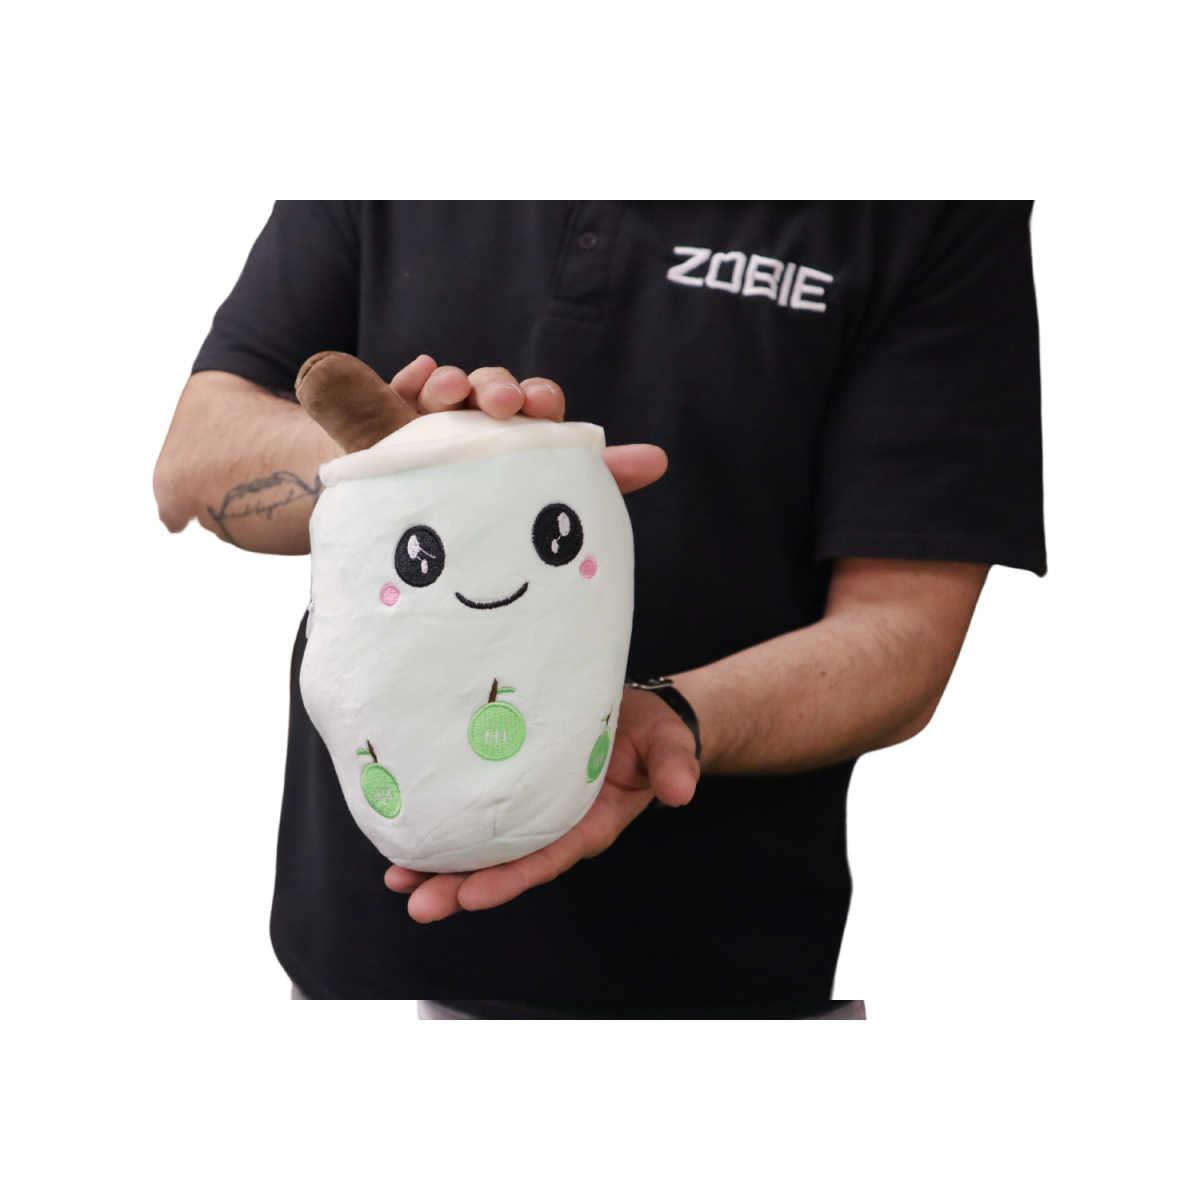 Boba Tea "S" Size Apple Plushie Toy (OpenEyes) - 10 Inches Tall/ 5 Inches Wide-Plushie-Zobie Productions-Zobie Productions